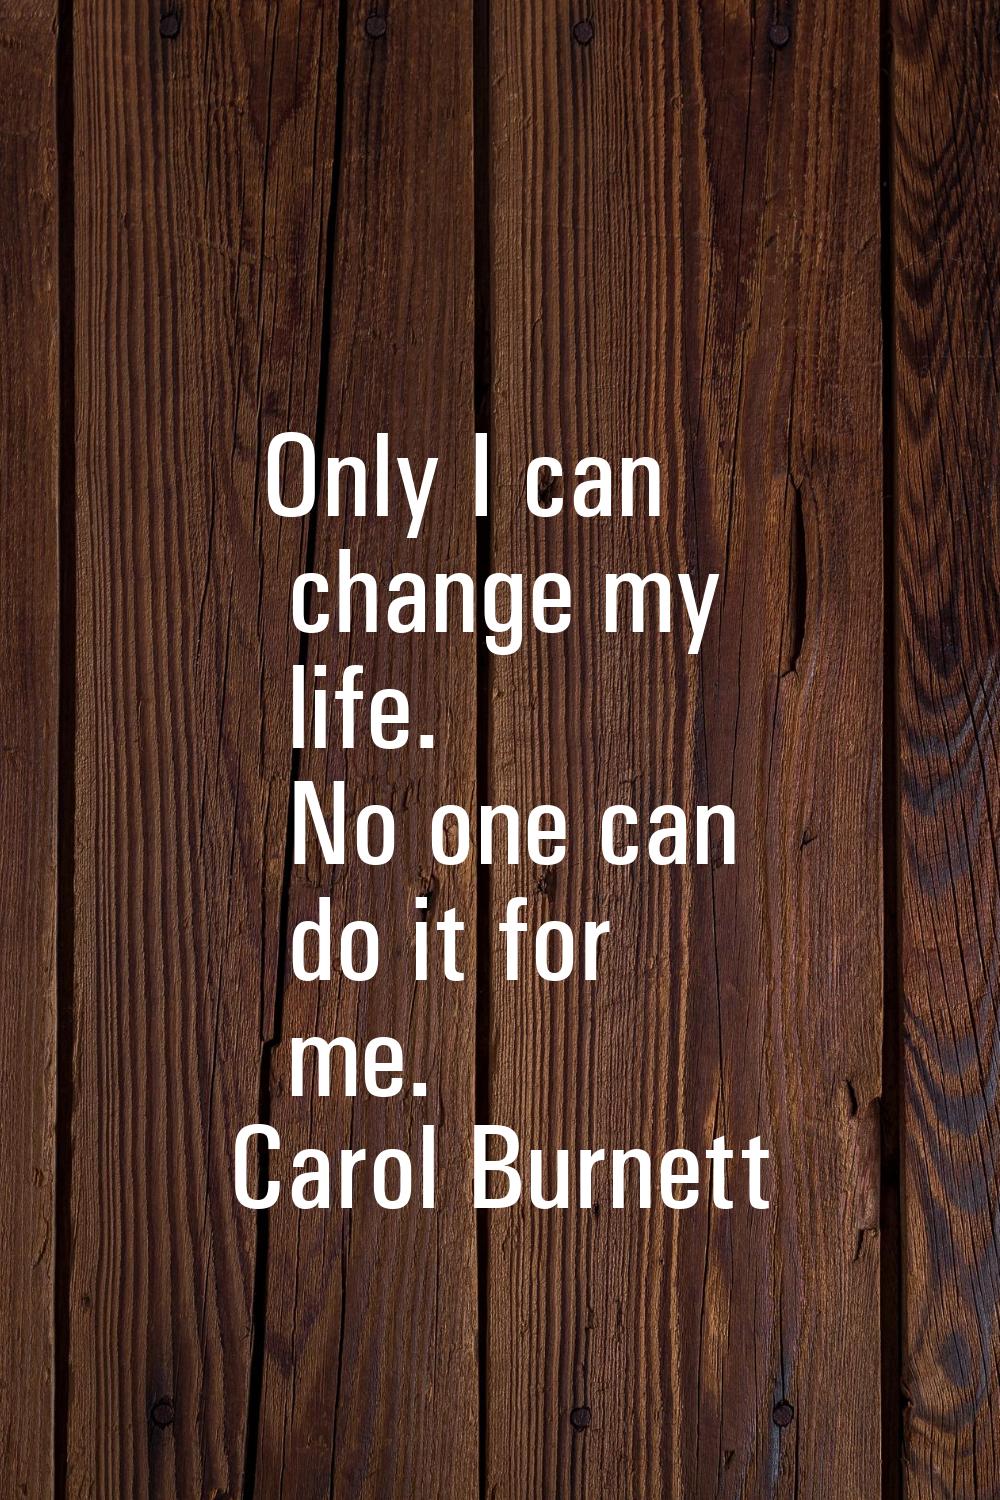 Only I can change my life. No one can do it for me.